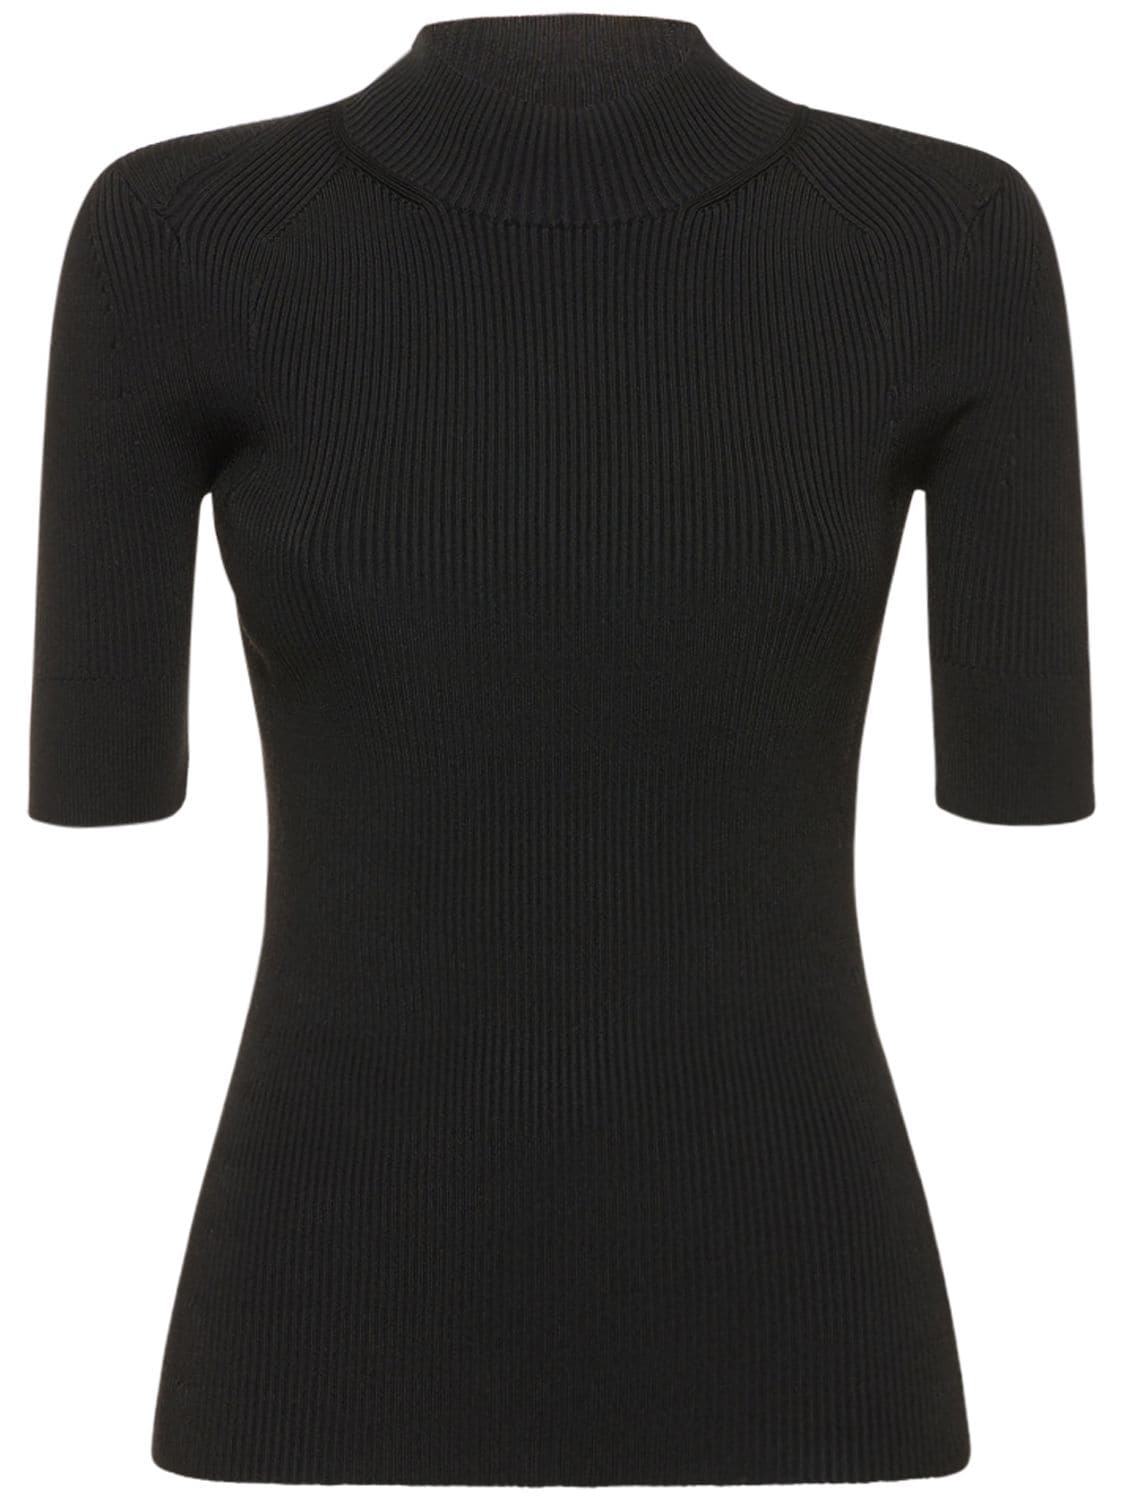 Image of Compact Rib Knit Technical Top